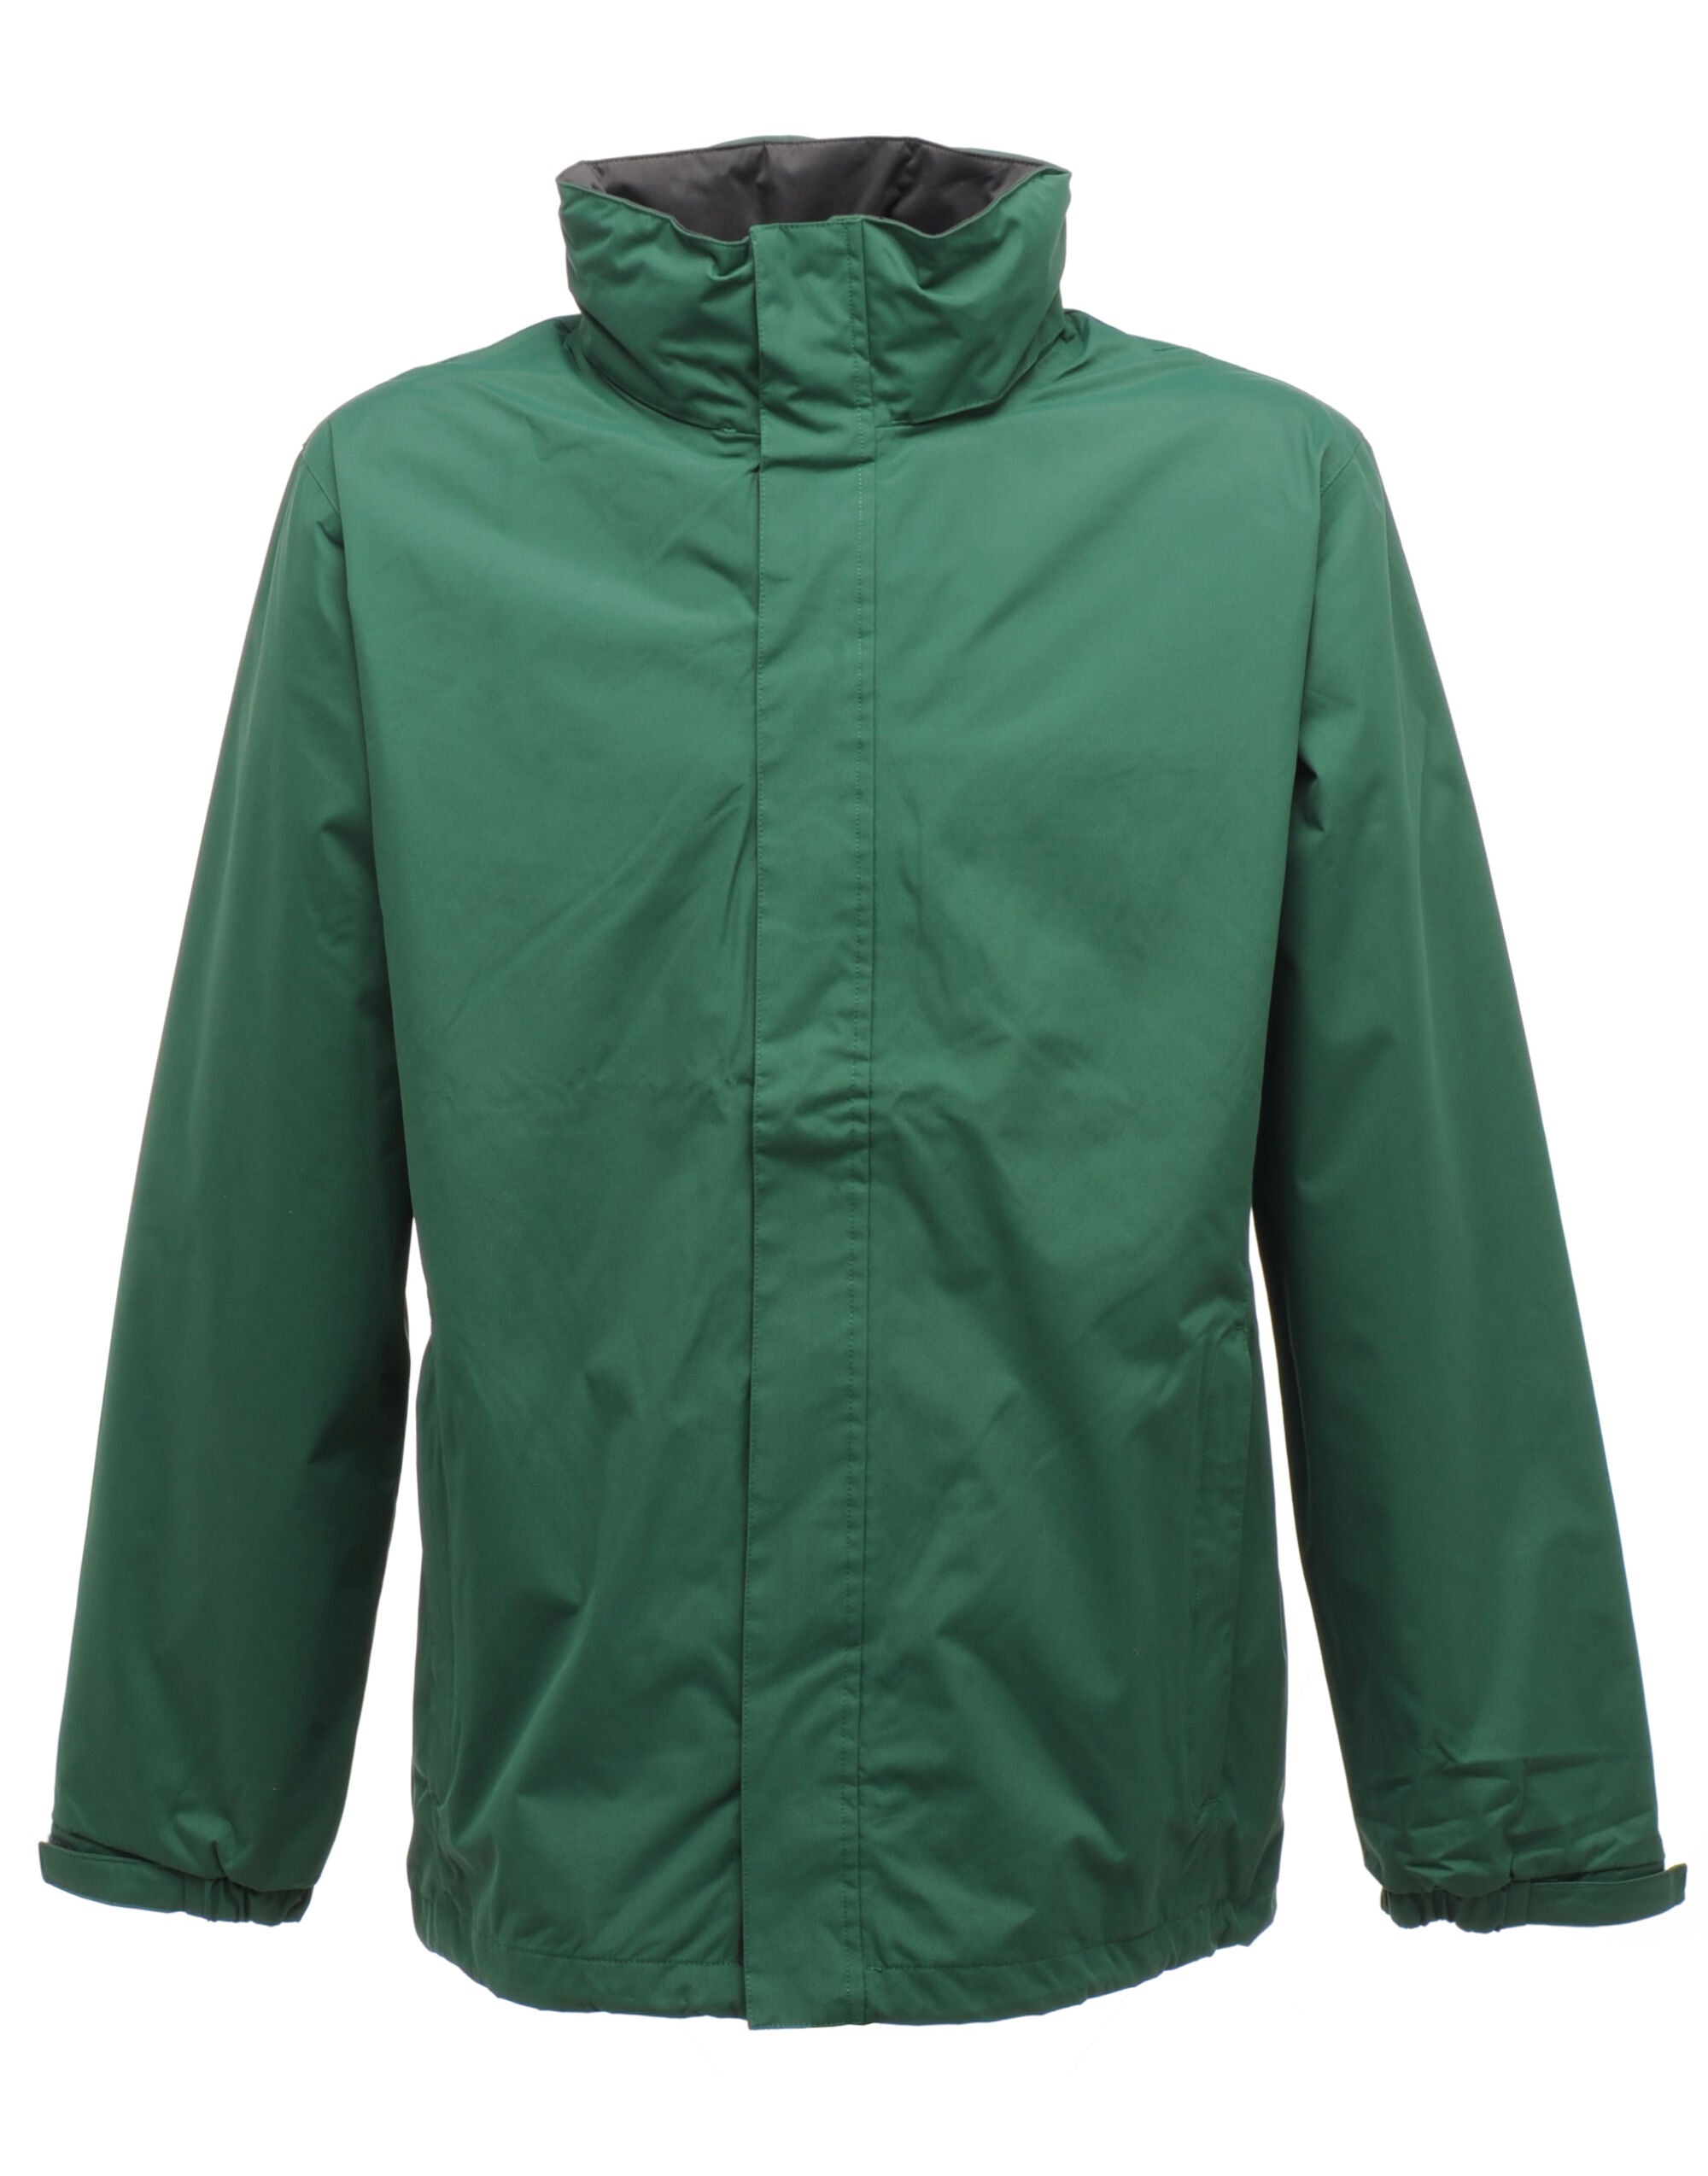 Regatta Professional Ardmore Waterproof Shell Jacket Hydrafort 5000 coated peached Polyester (TRW461)